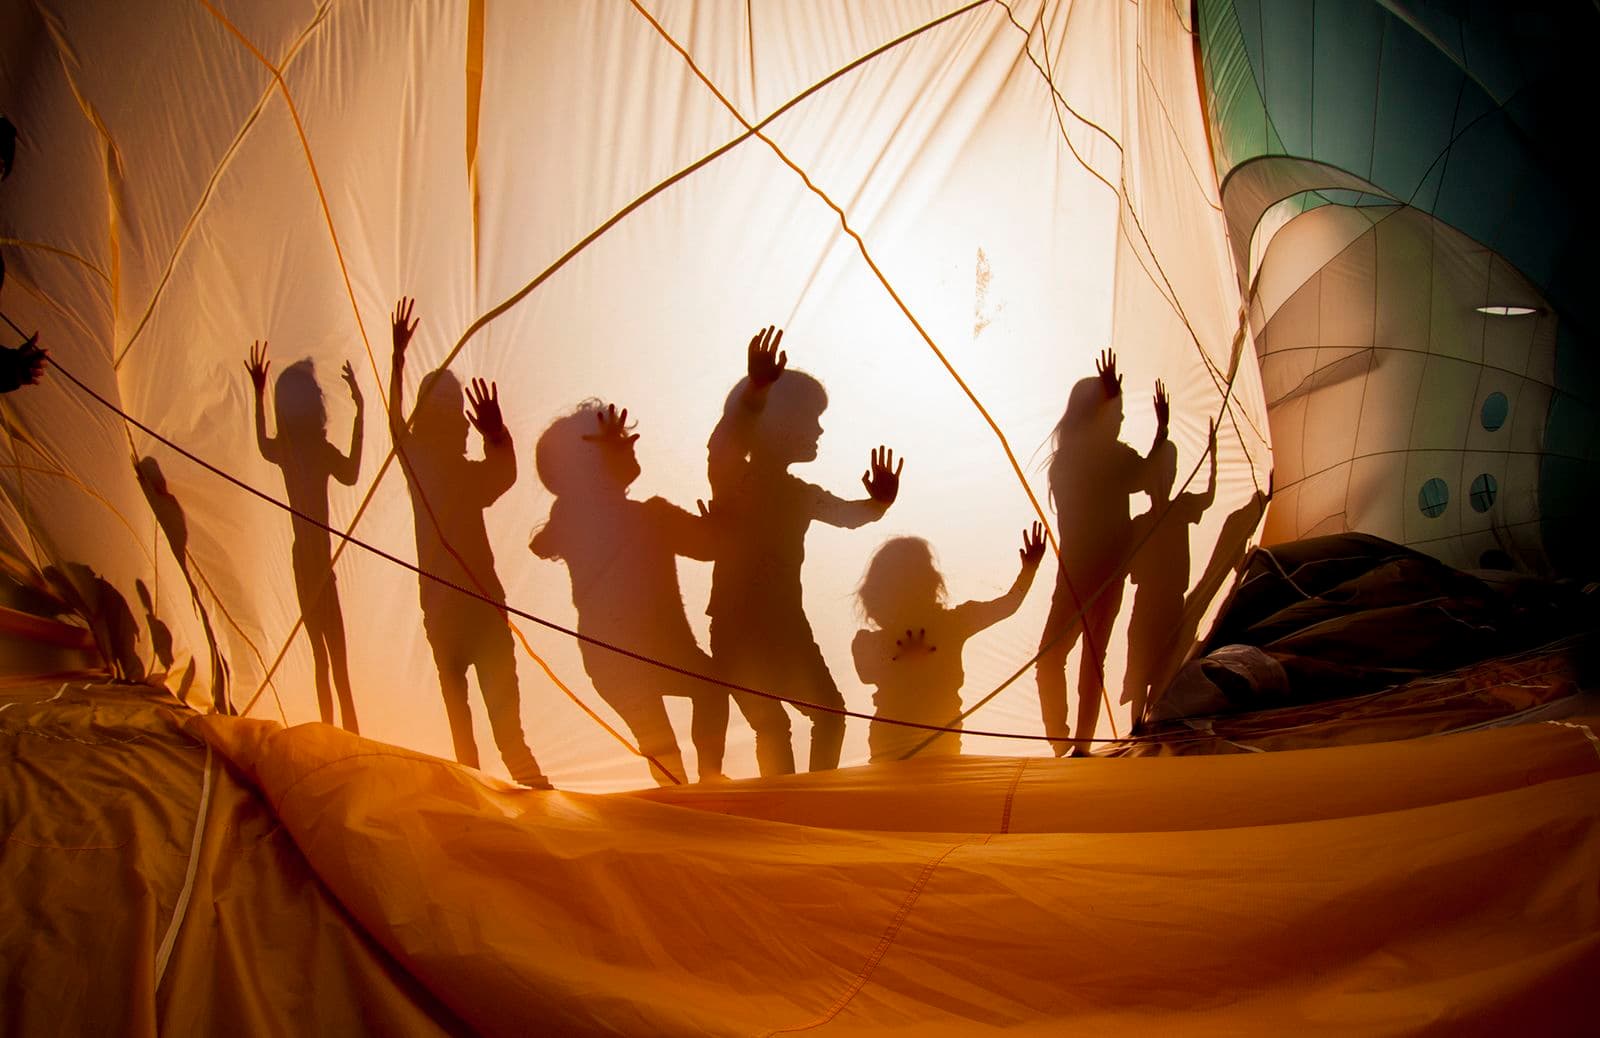 Photograph of balloon with silhouettes of kids playing